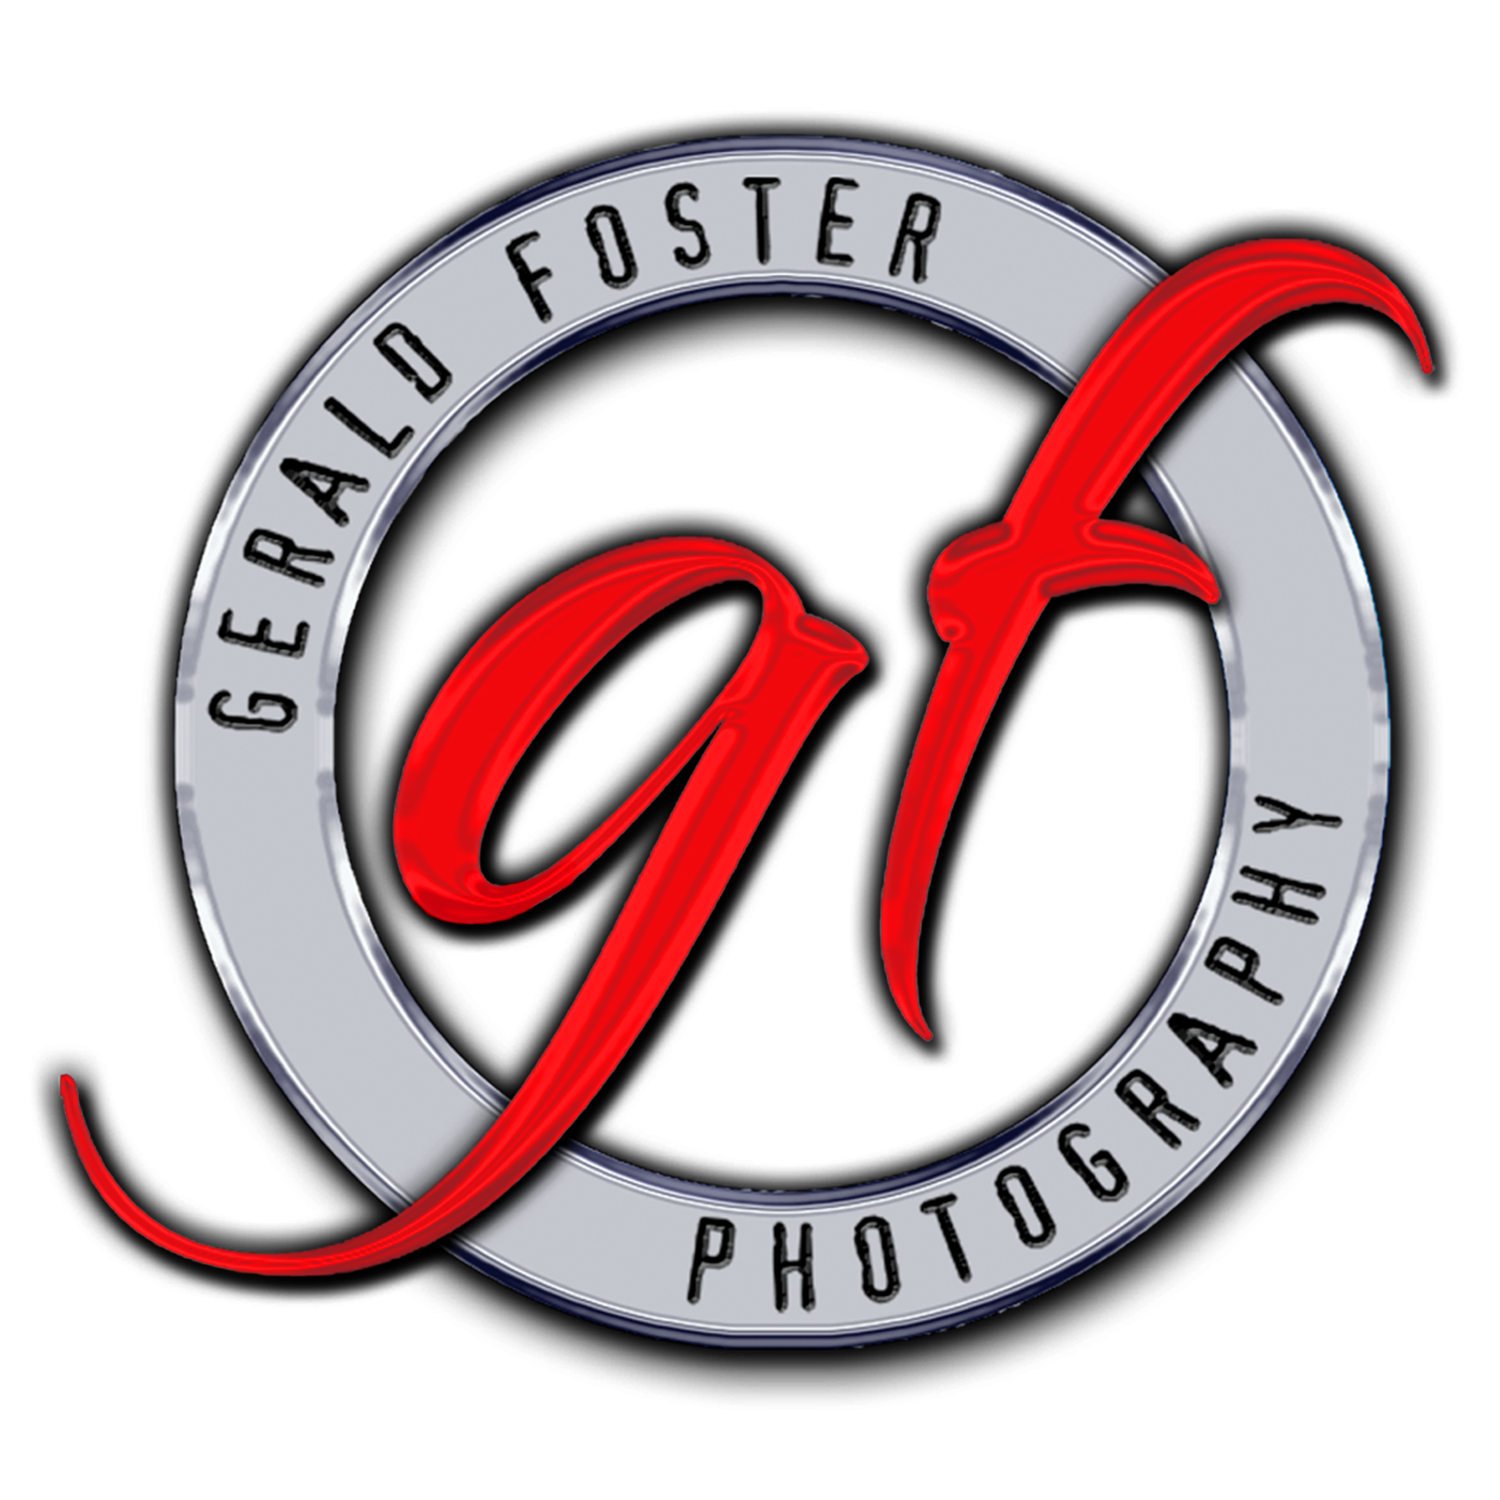 Gerald Foster Photography